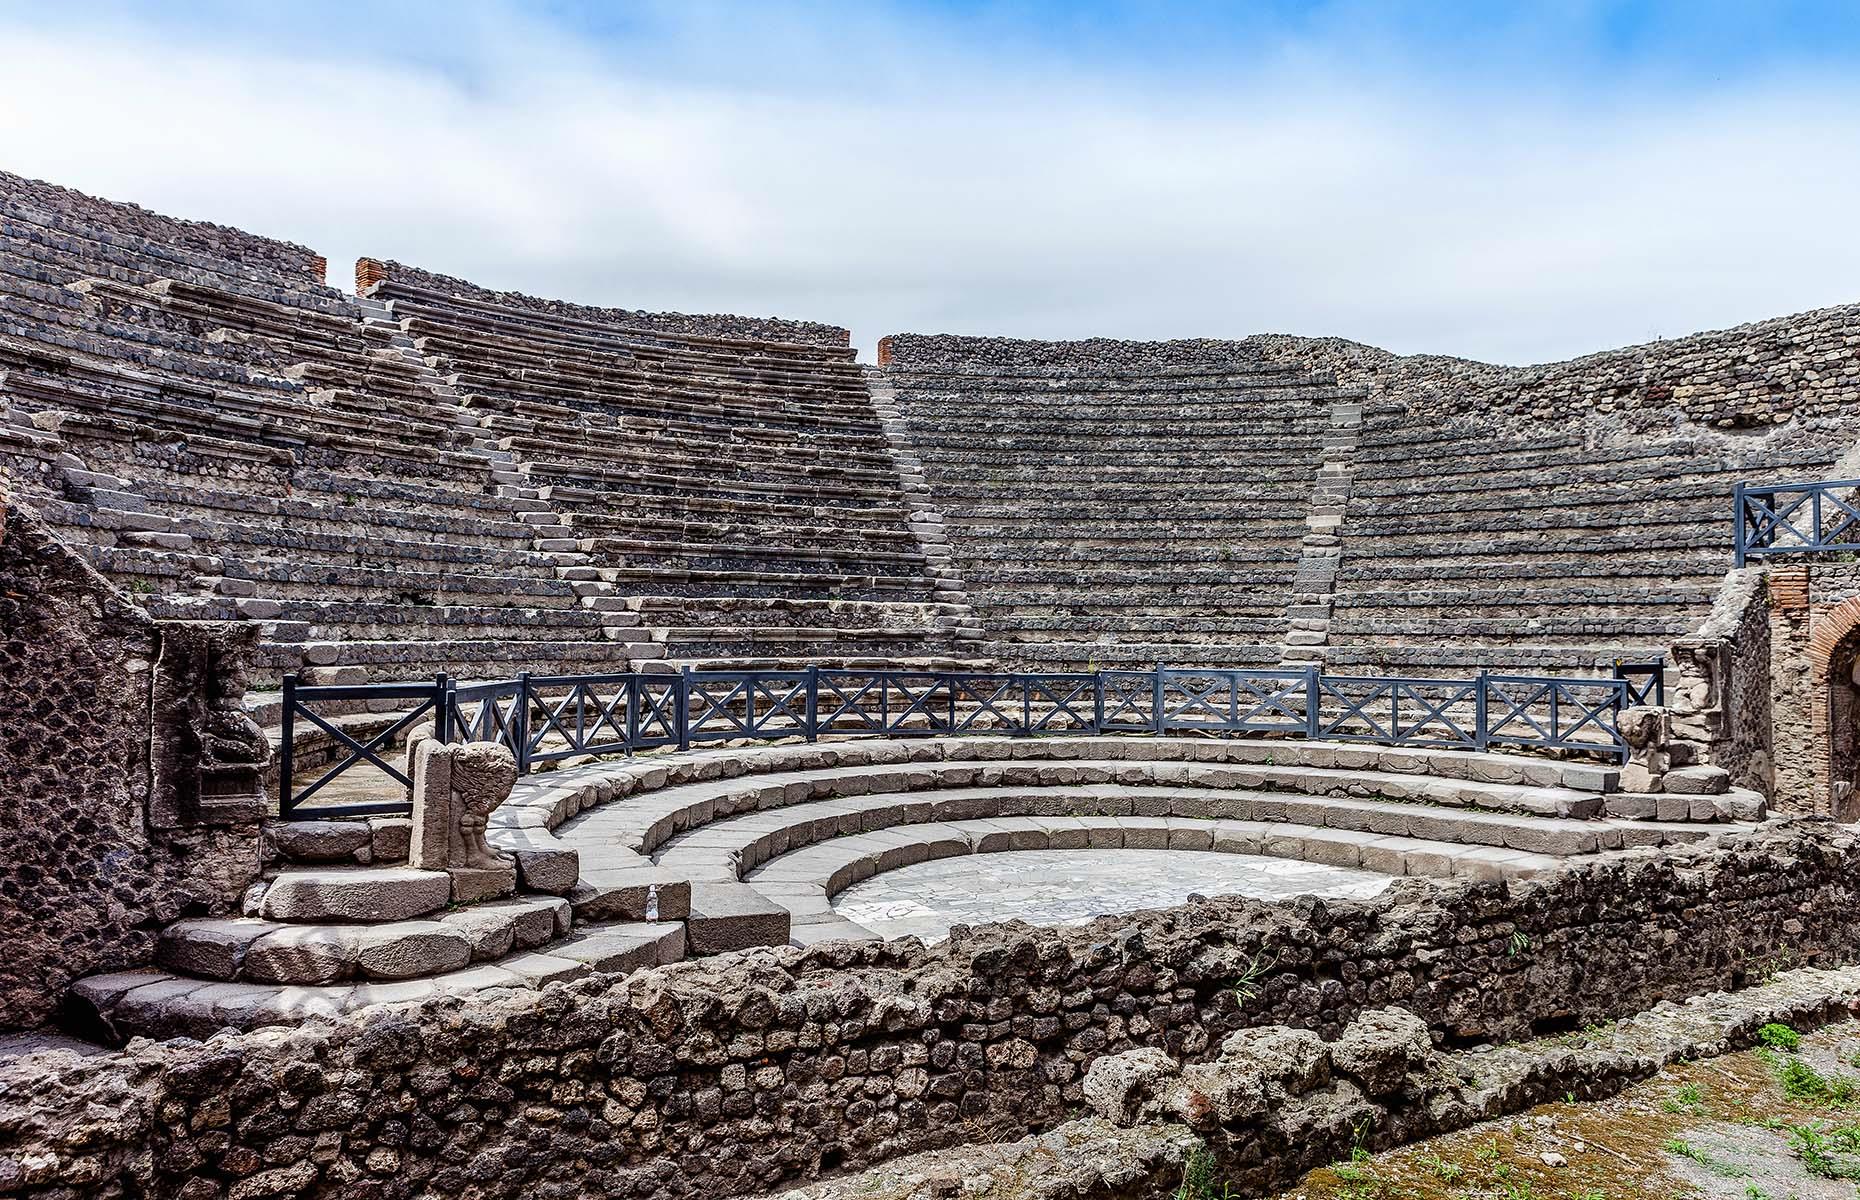 <p>Pompeii’s amphitheatre held up to 20,000 spectators for thrilling gladiatorial battles that drew people from surrounding villages and had the crowd baying for blood. But none more so than in AD 59, when a huge riot broke out between the people of Pompeii and those from nearby Nuceria.</p>  <p>What started as name-calling and jeering soon escalated into throwing stones and clashing swords – and a bloody brawl ensued. The senate in Rome investigated and punished Pompeii with a 10-year ban on hosting the games.</p>